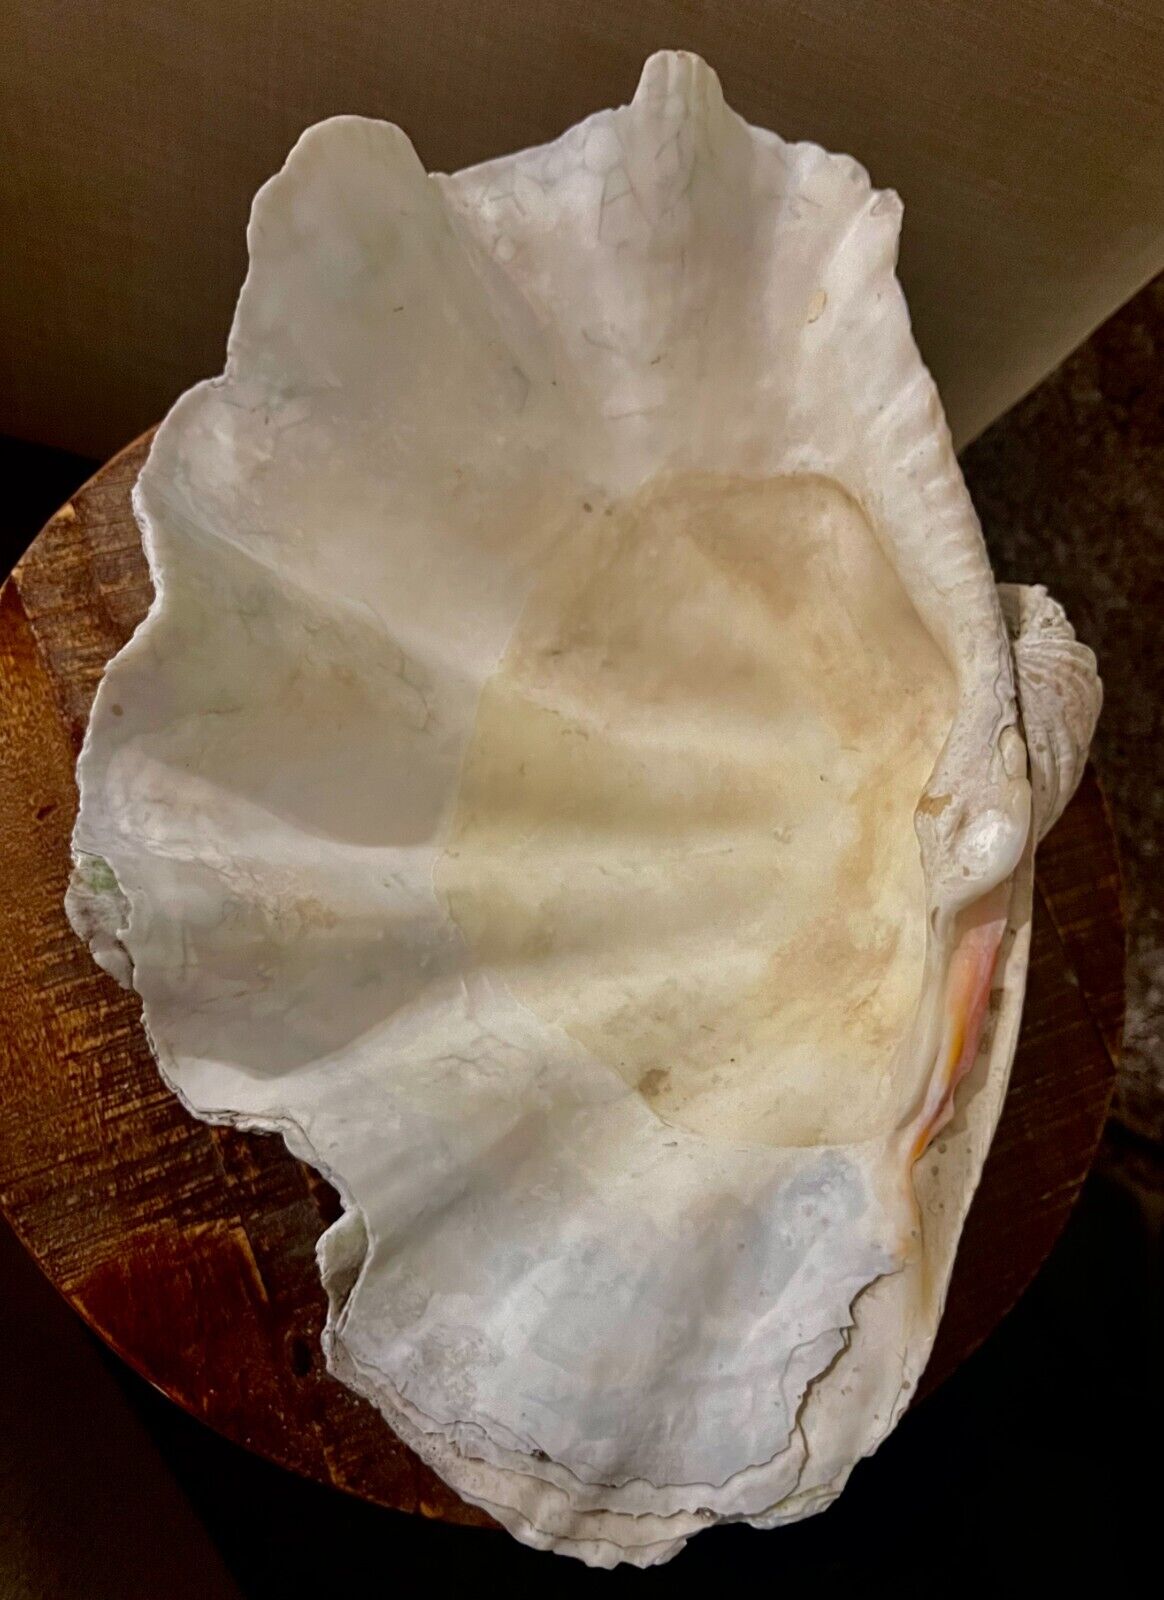 SALE - RARE Stunning 'Tridacna Gigas’ Giant Clam Shell Fossil - 19x13